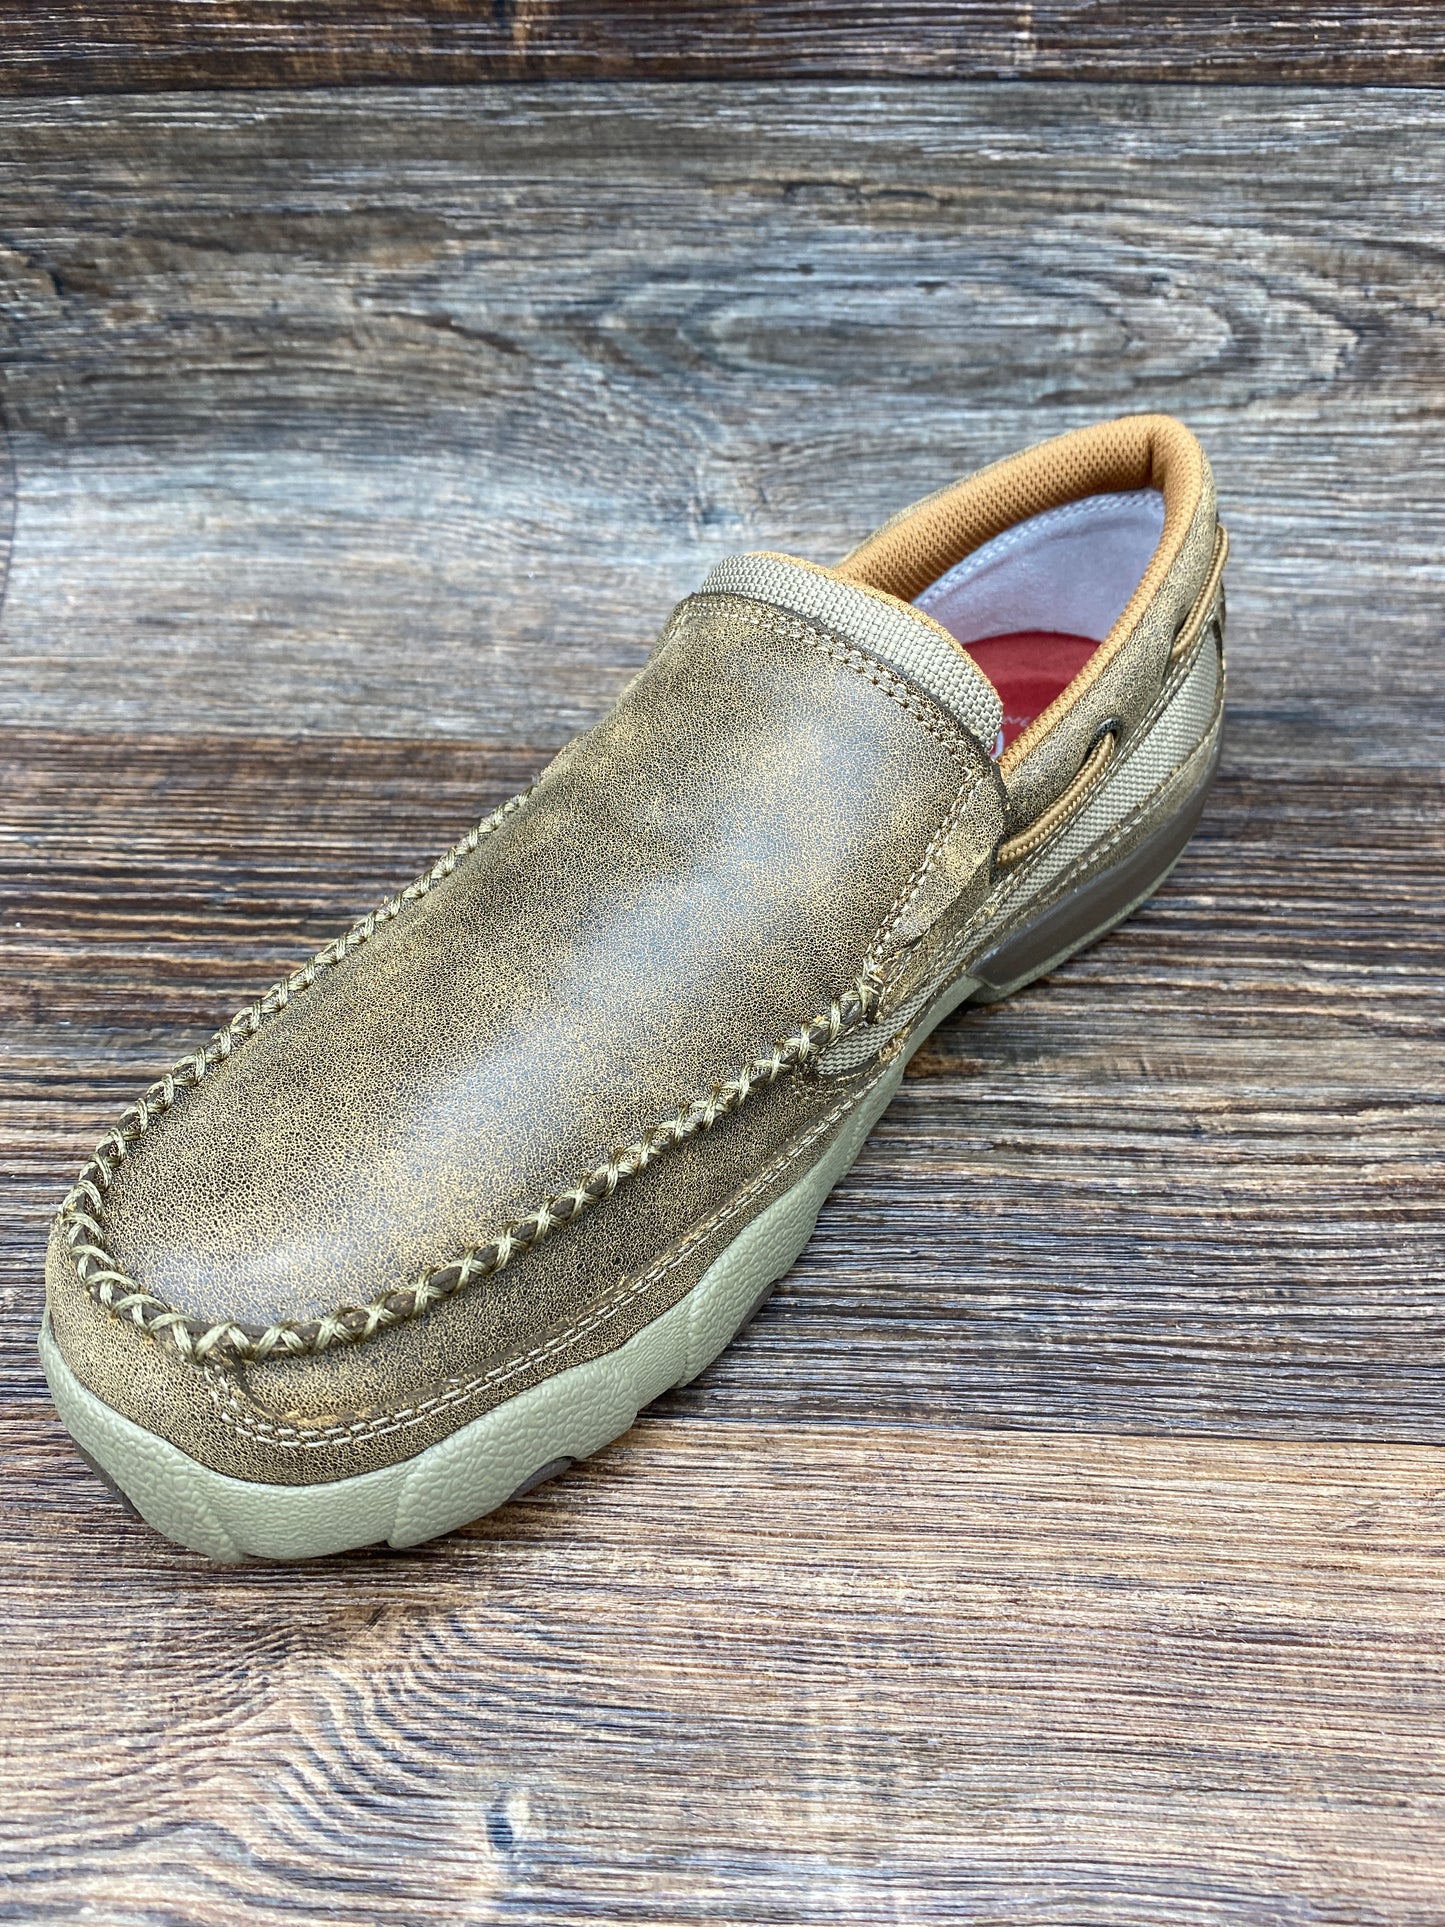 mdms002 Men’s Original Slip-On Driving Moc by Twisted X